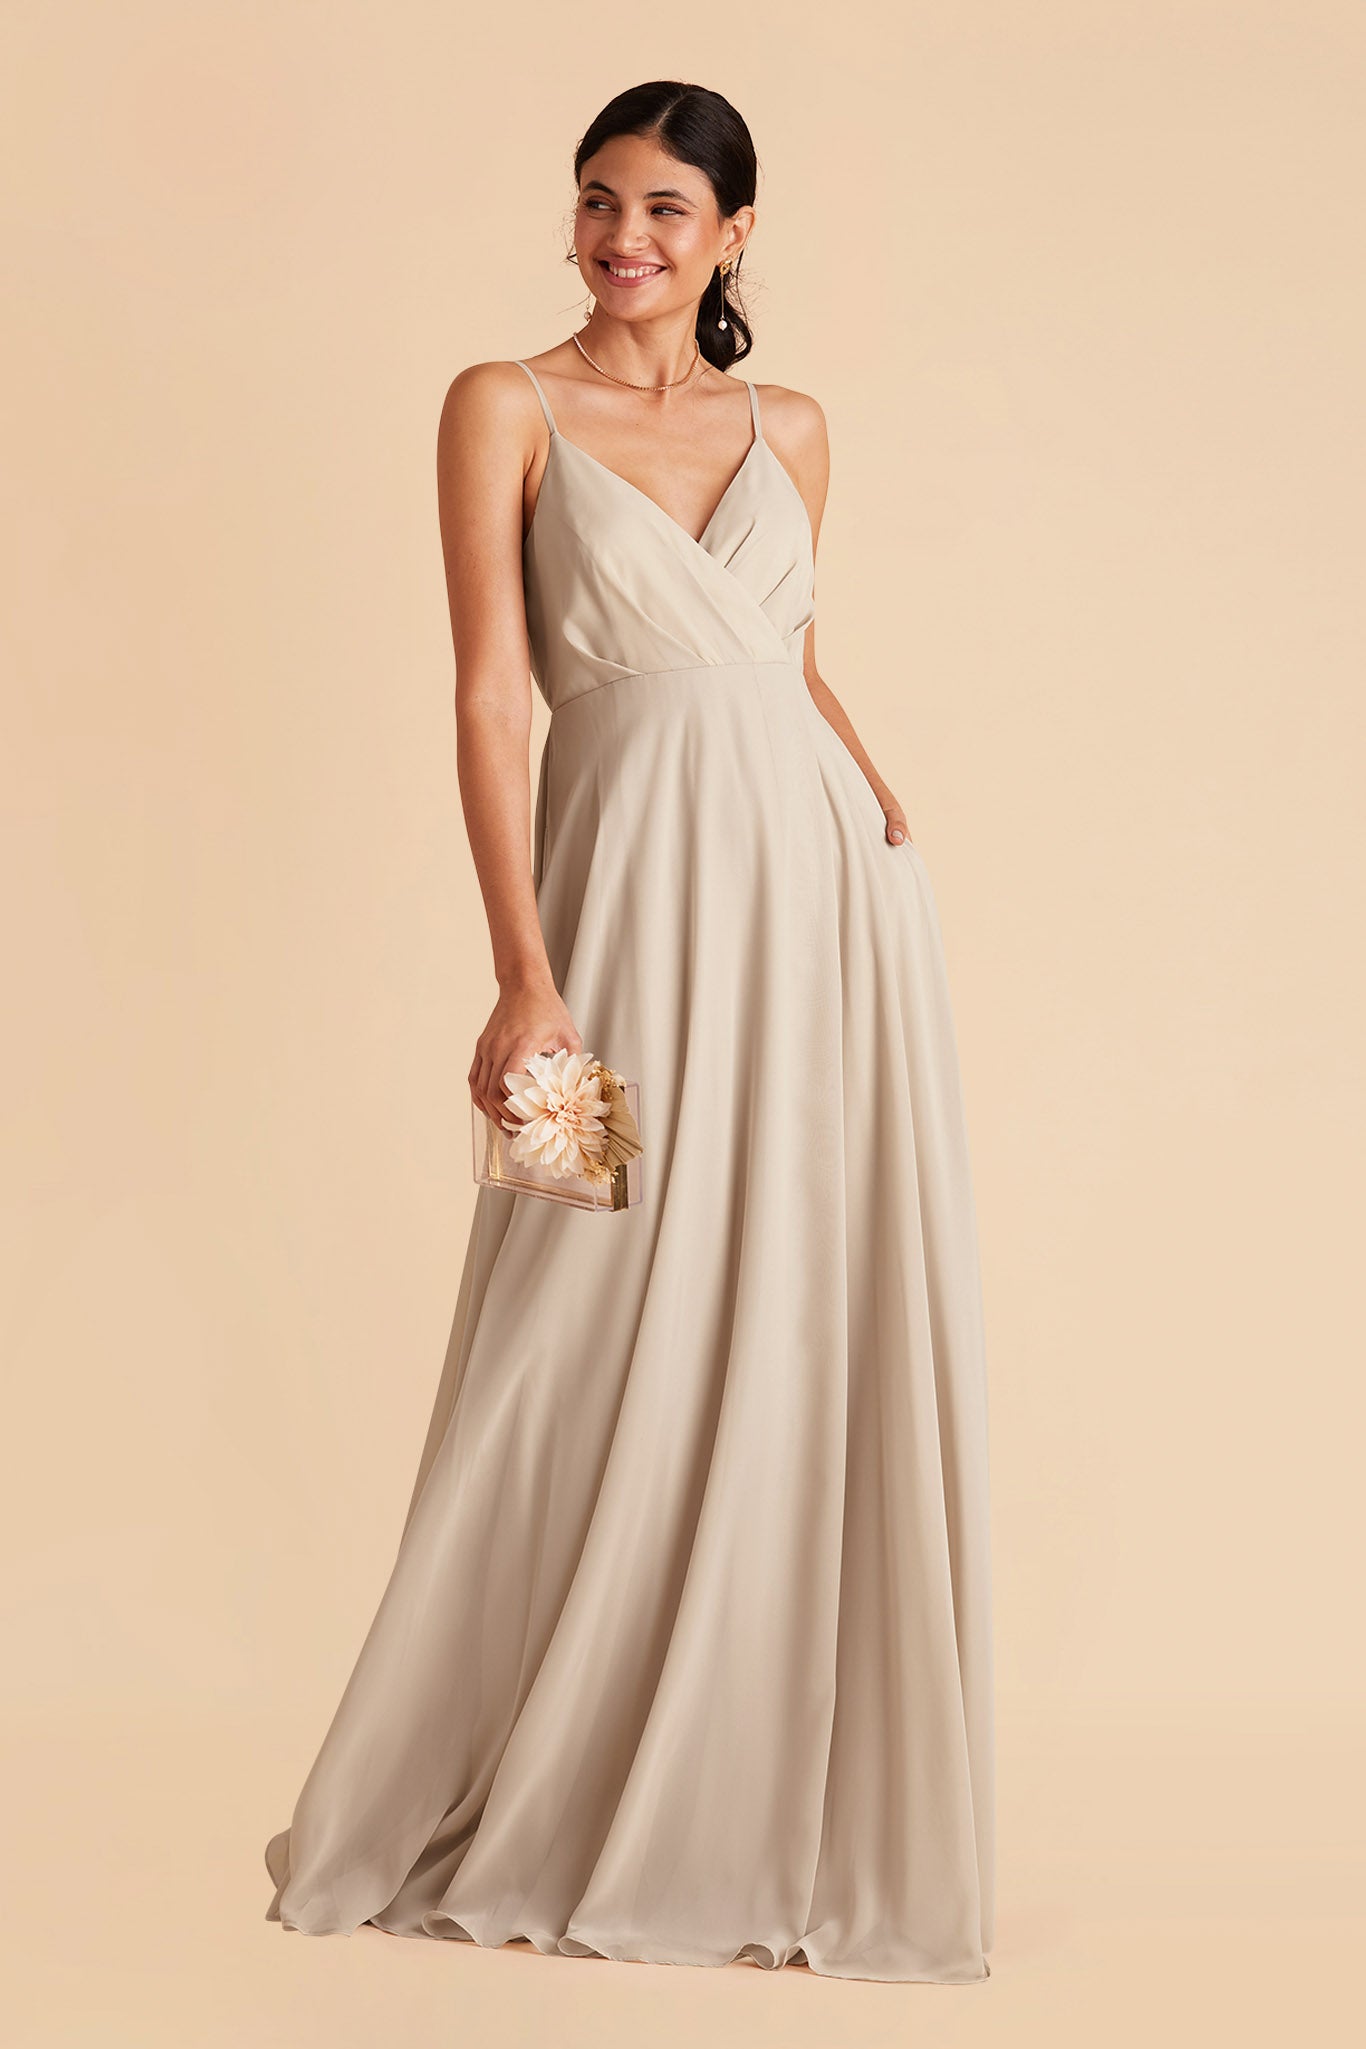 Kaia bridesmaids dress in neutral champagne chiffon by Birdy Grey, front view